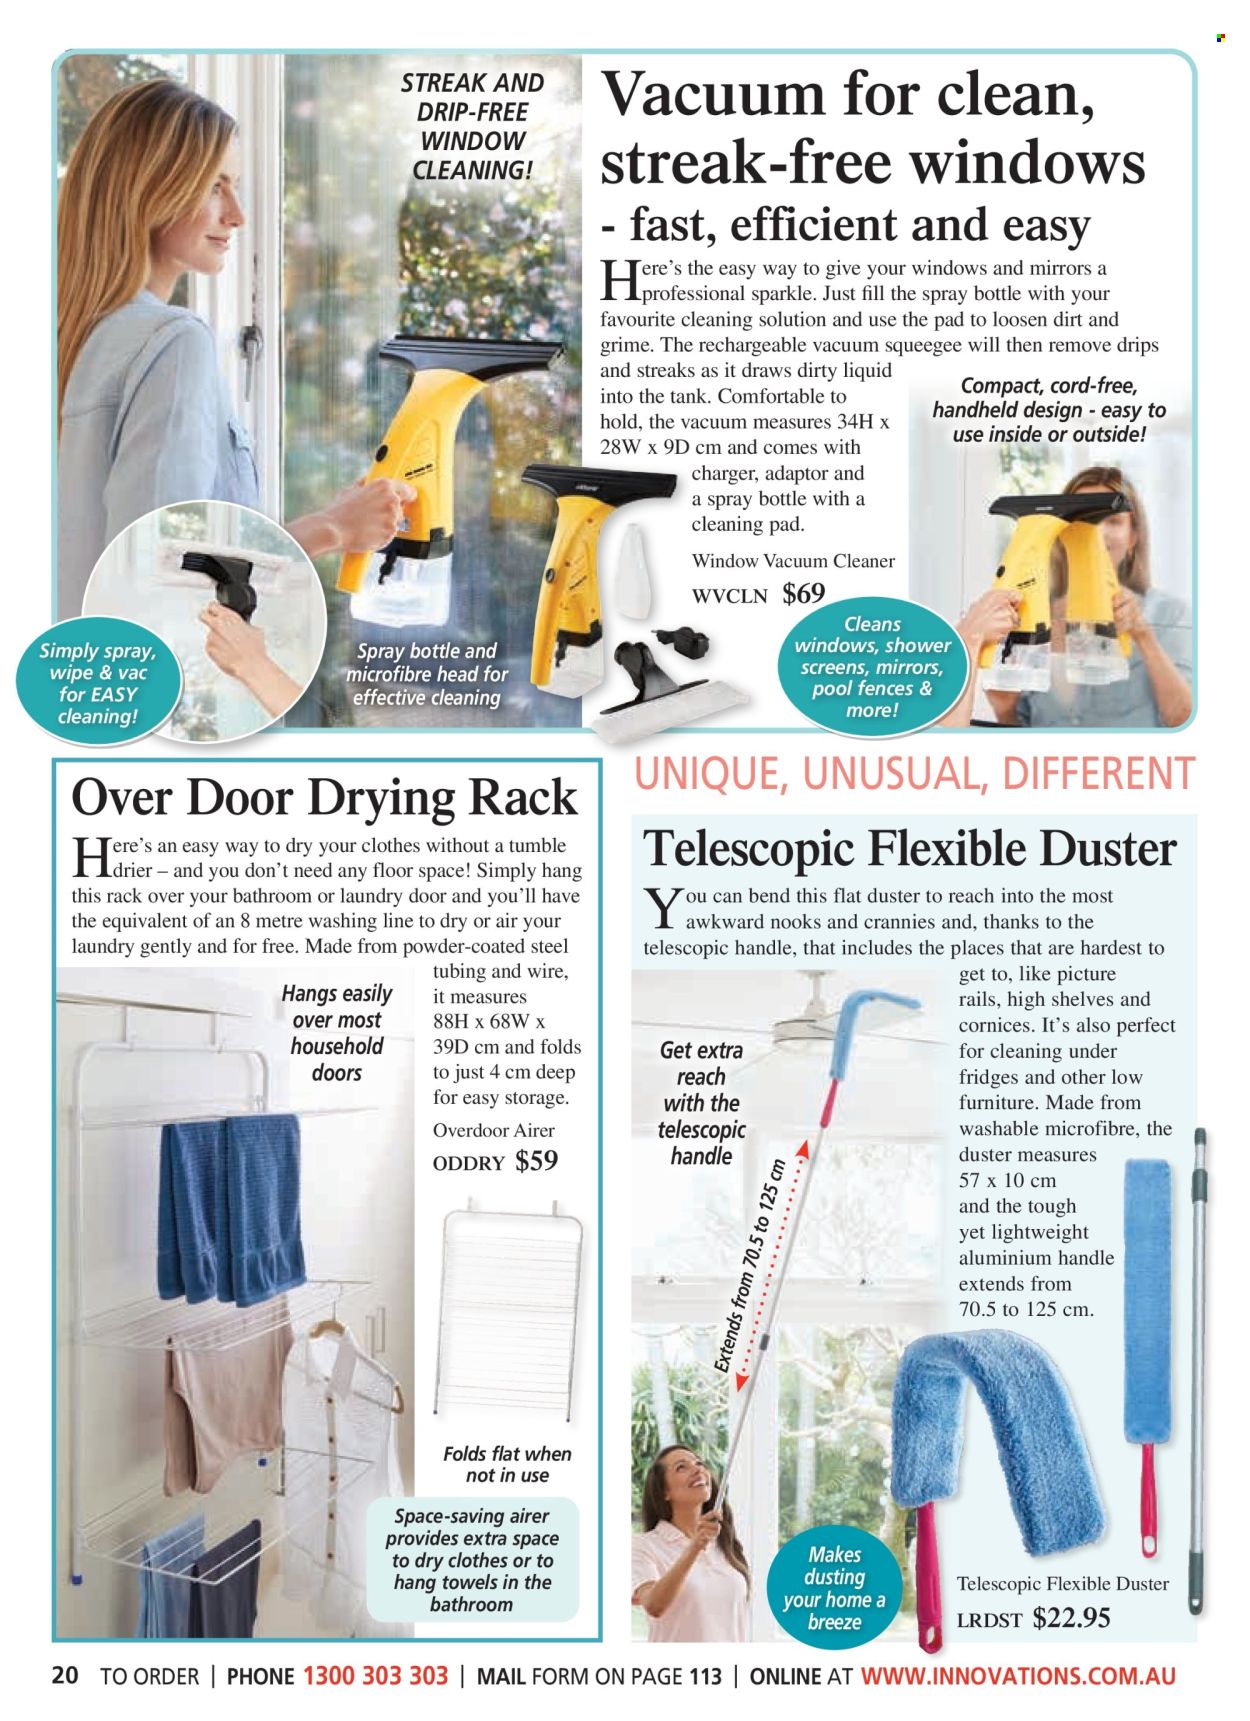 thumbnail - Innovations Catalogue - Sales products - drying rack, adaptor, spray bottle, airer, duster, towel, vacuum cleaner, window vacuum cleaner. Page 20.